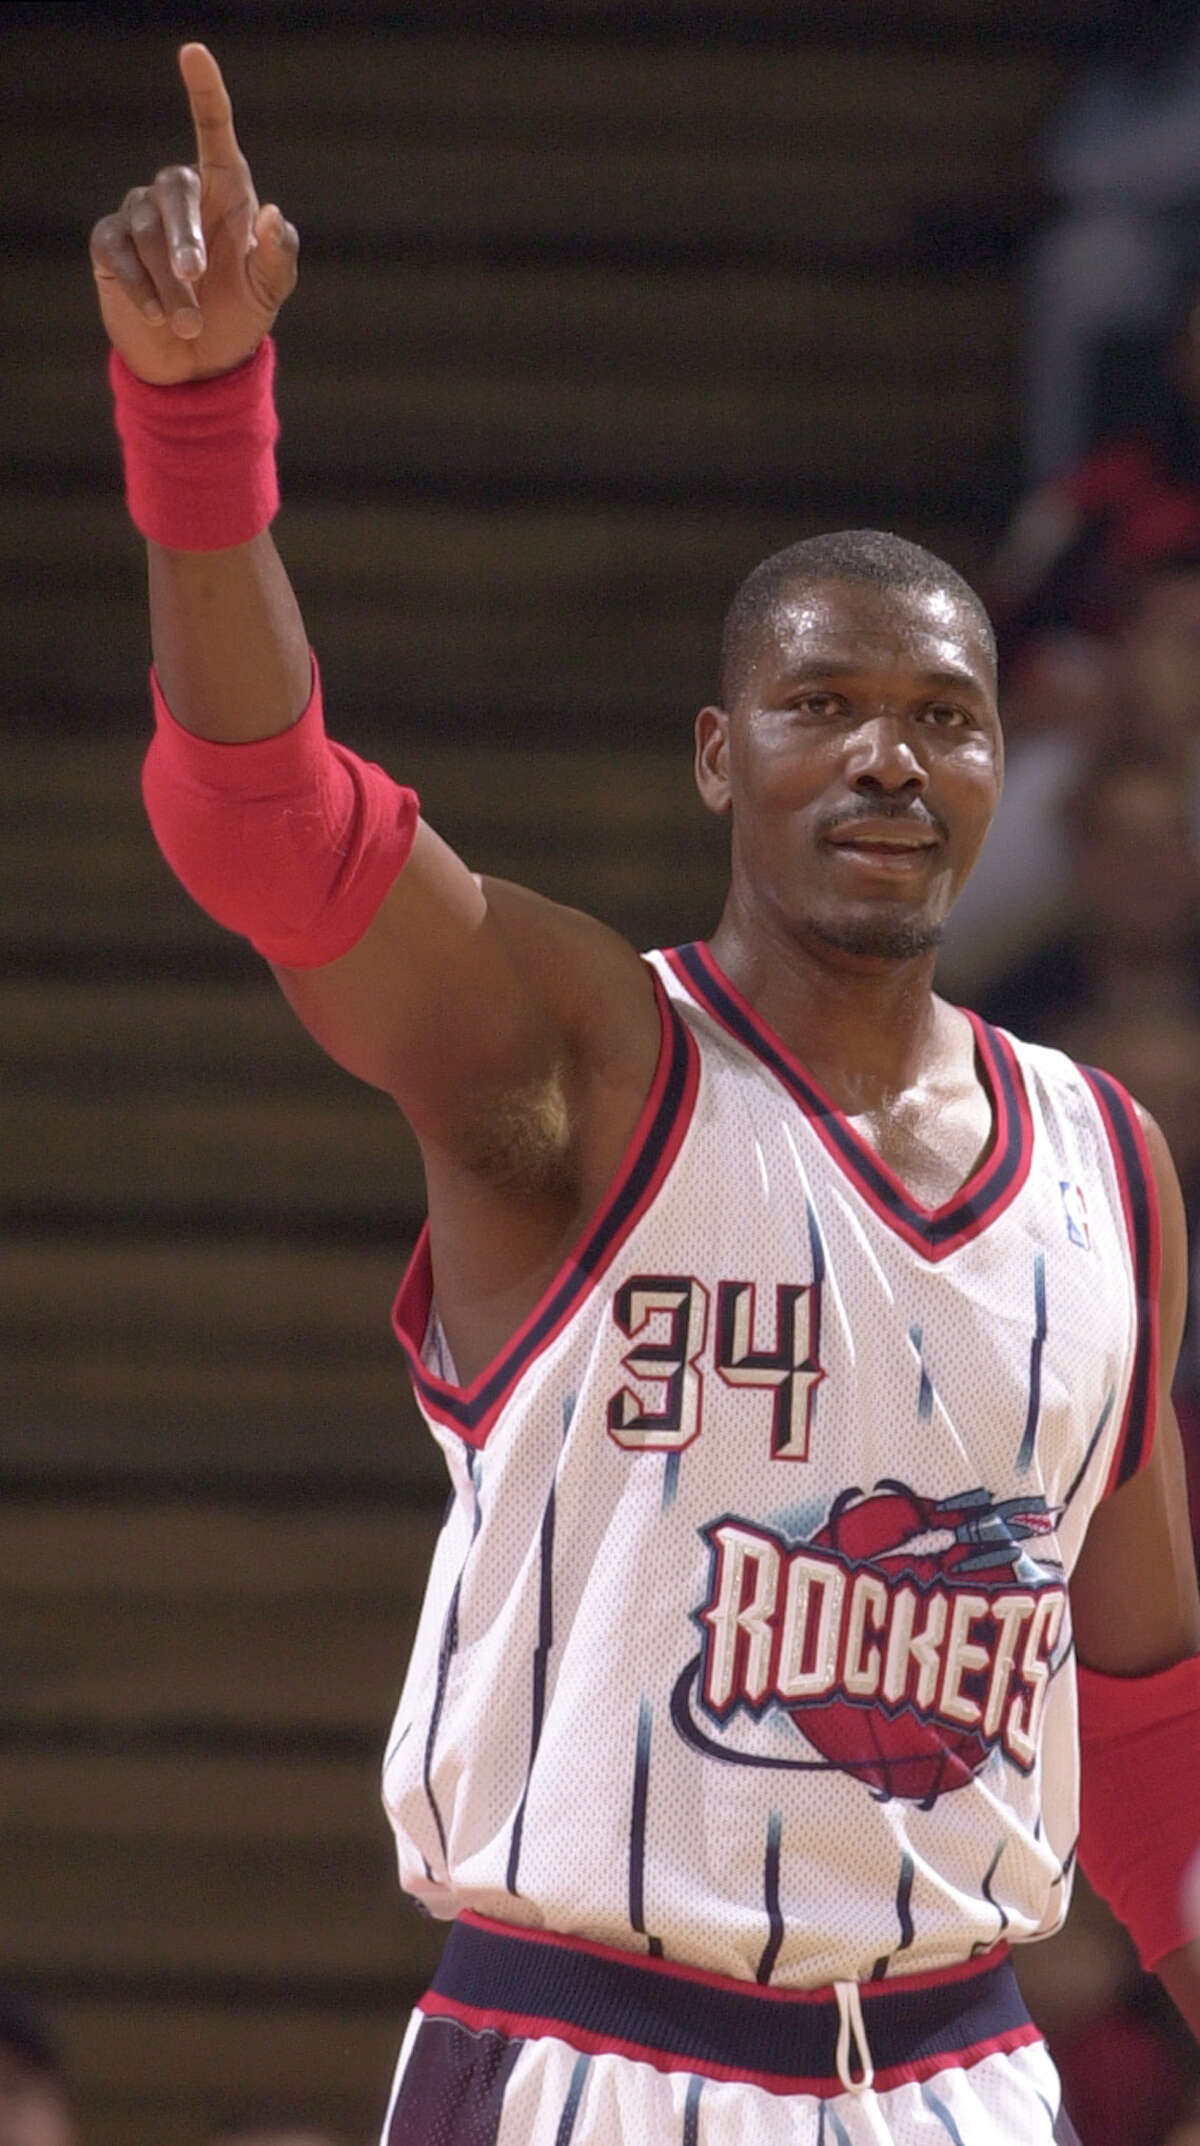 Hakeem Olajuwon celebrates after he started a fast break that ended in a Steve Francis slam during the first quarter of the Houston Rockets season finale vs. the Minnesota Timberwolves at Compaq Center in Houston, TX Tuesday night April 17, 2001. (Smiley N. Pool/Houston Chronicle) 04/17/01. HOUCHRON CAPTION (04/19/2001): A top priority for the Rockets during the off-season is setting the status of Hakeem Olajuwon, who hopes to play another season, with Houston as his preferred locale. HOUCHRON CAPTION (08/02/2001): Hakeem Olajuwon led the Rockets to two NBA championships. HOUCHRON CAPTION (08/04/2001): Houston has had many sports icons, and coincidentally, some of the best have worn the number 34: Earl Campbell (NOT PICTURED). Nolan Ryan (NOT PICTURED). Hakeem Olajuwon. In Sports 2, the Chronicle relives Olajuwon's stellar career and lists his 34 greatest moments as a Rocket. HOUCHRON CAPTION (08/05/2001): On the cover: Hakeem Olajuwon photographed by the Chronicle's Smiley N. Pool during his final game in a Rockets uniform on April 17, 2001. HOUSTON CHRONICLE SPECIAL SECTION: HAKEEM OLAJUWON: SPACE CITY DREAM.